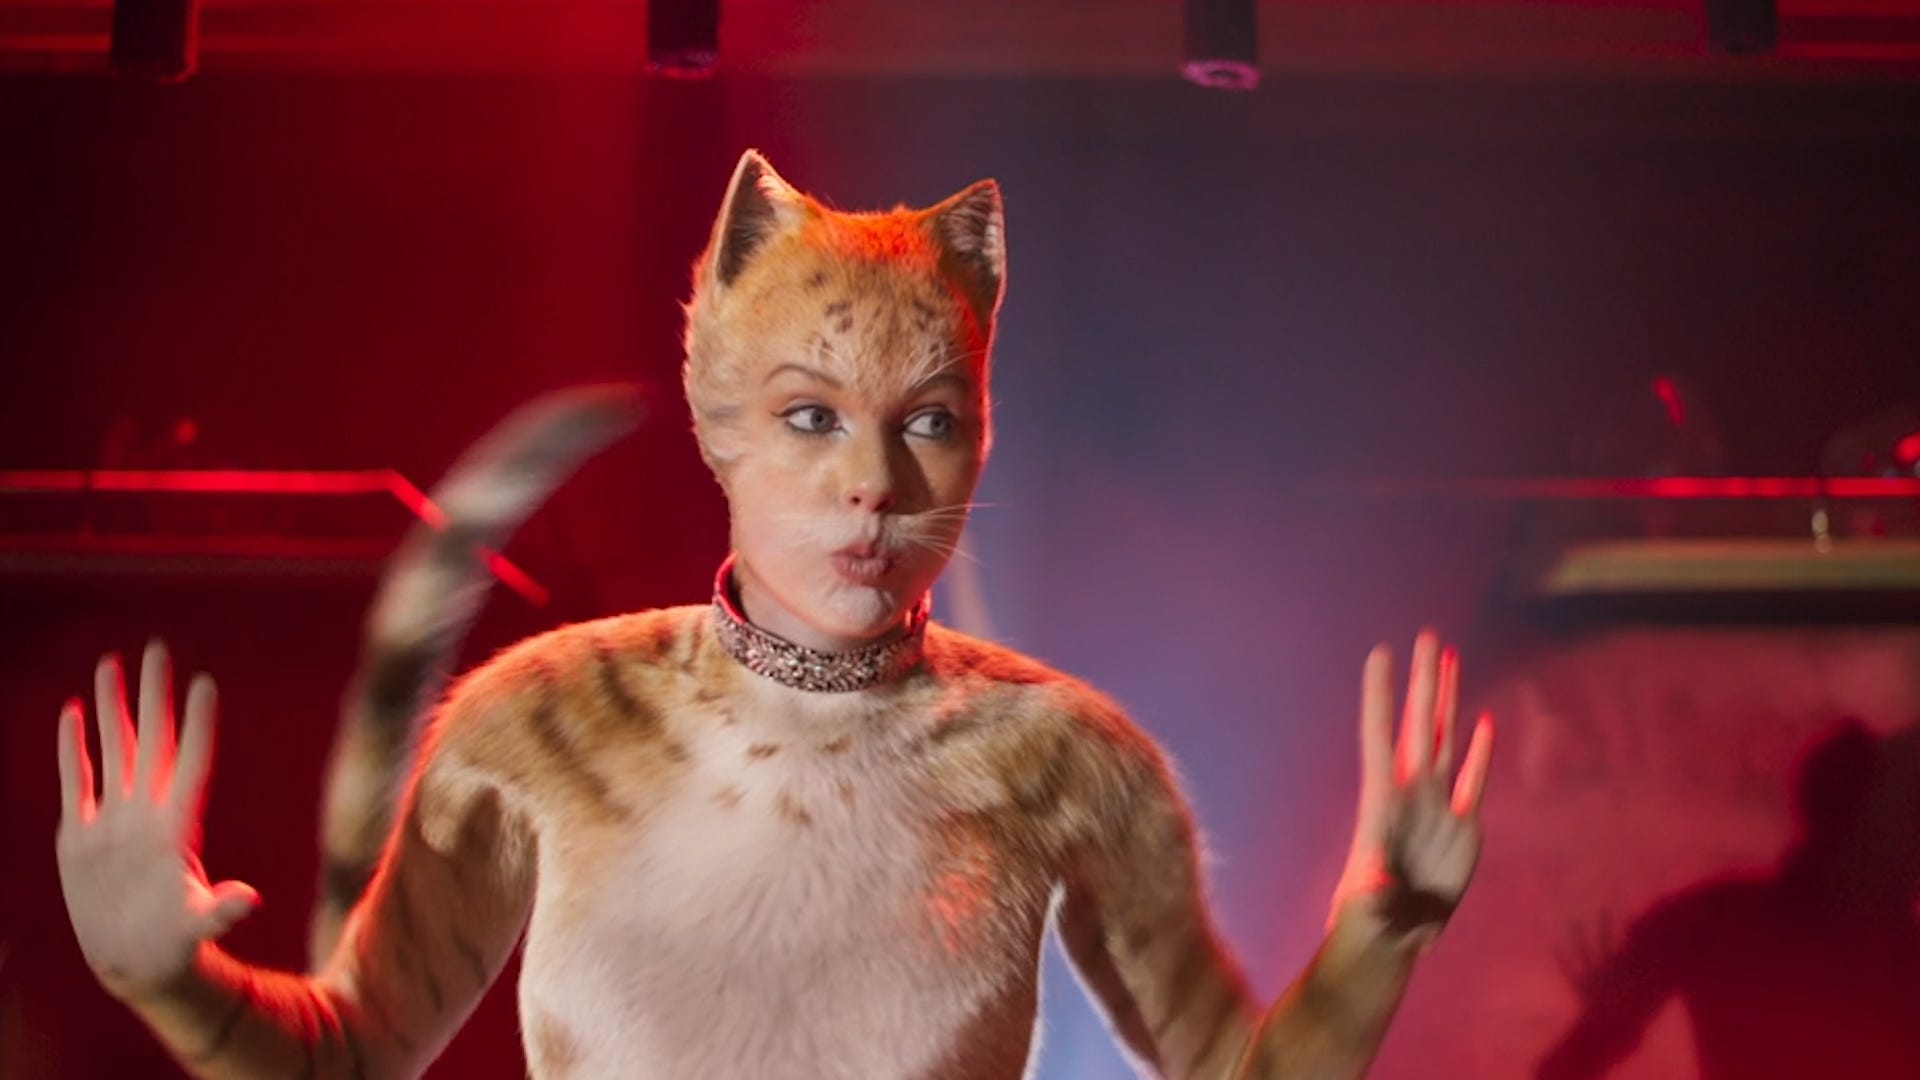 Review Cats Is A Feline Fiasco Meant To Induce Nightmares